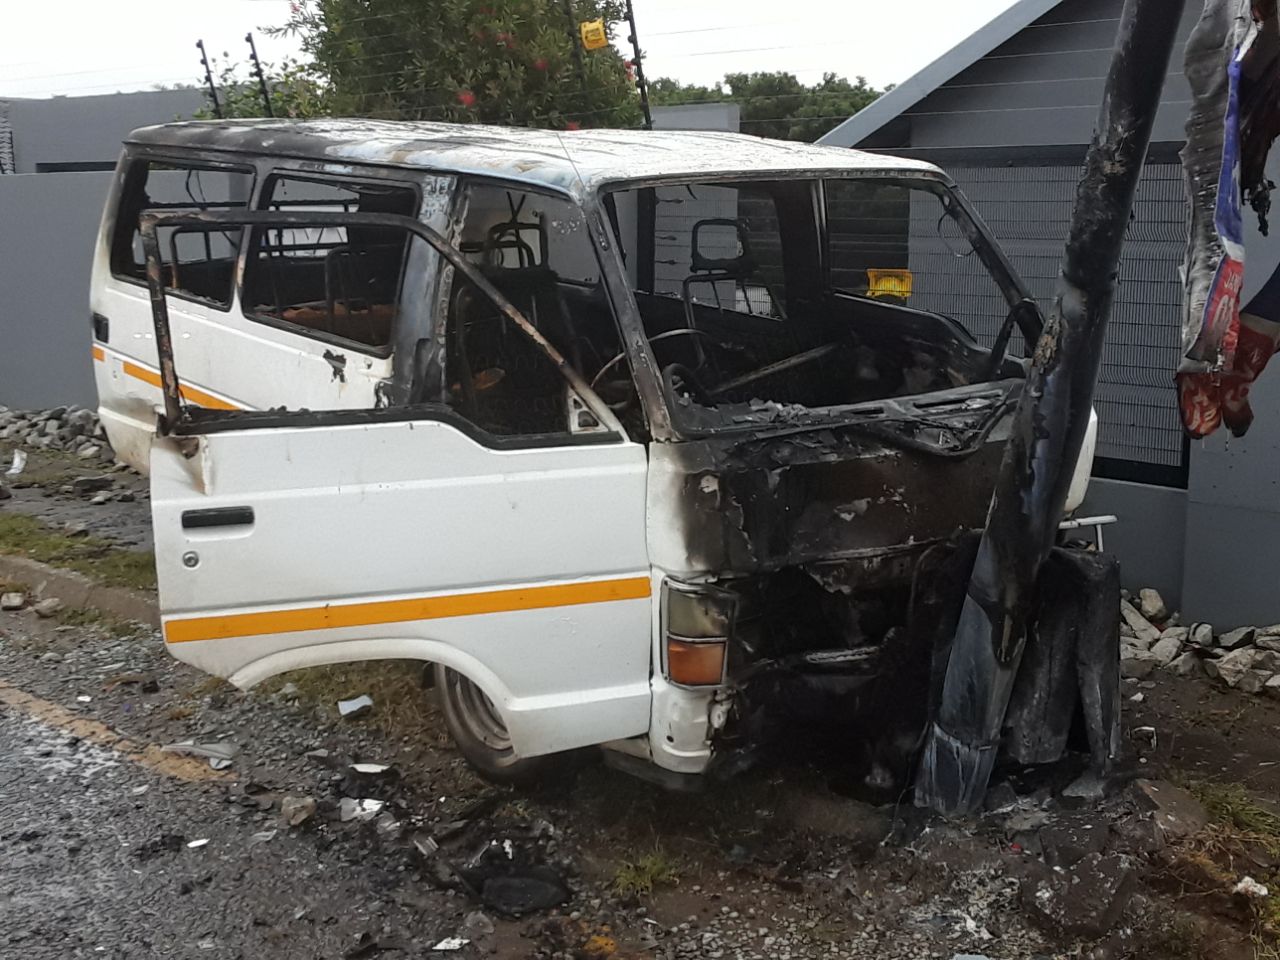 Taxi bursts into flames after hitting pedestrian and light pole